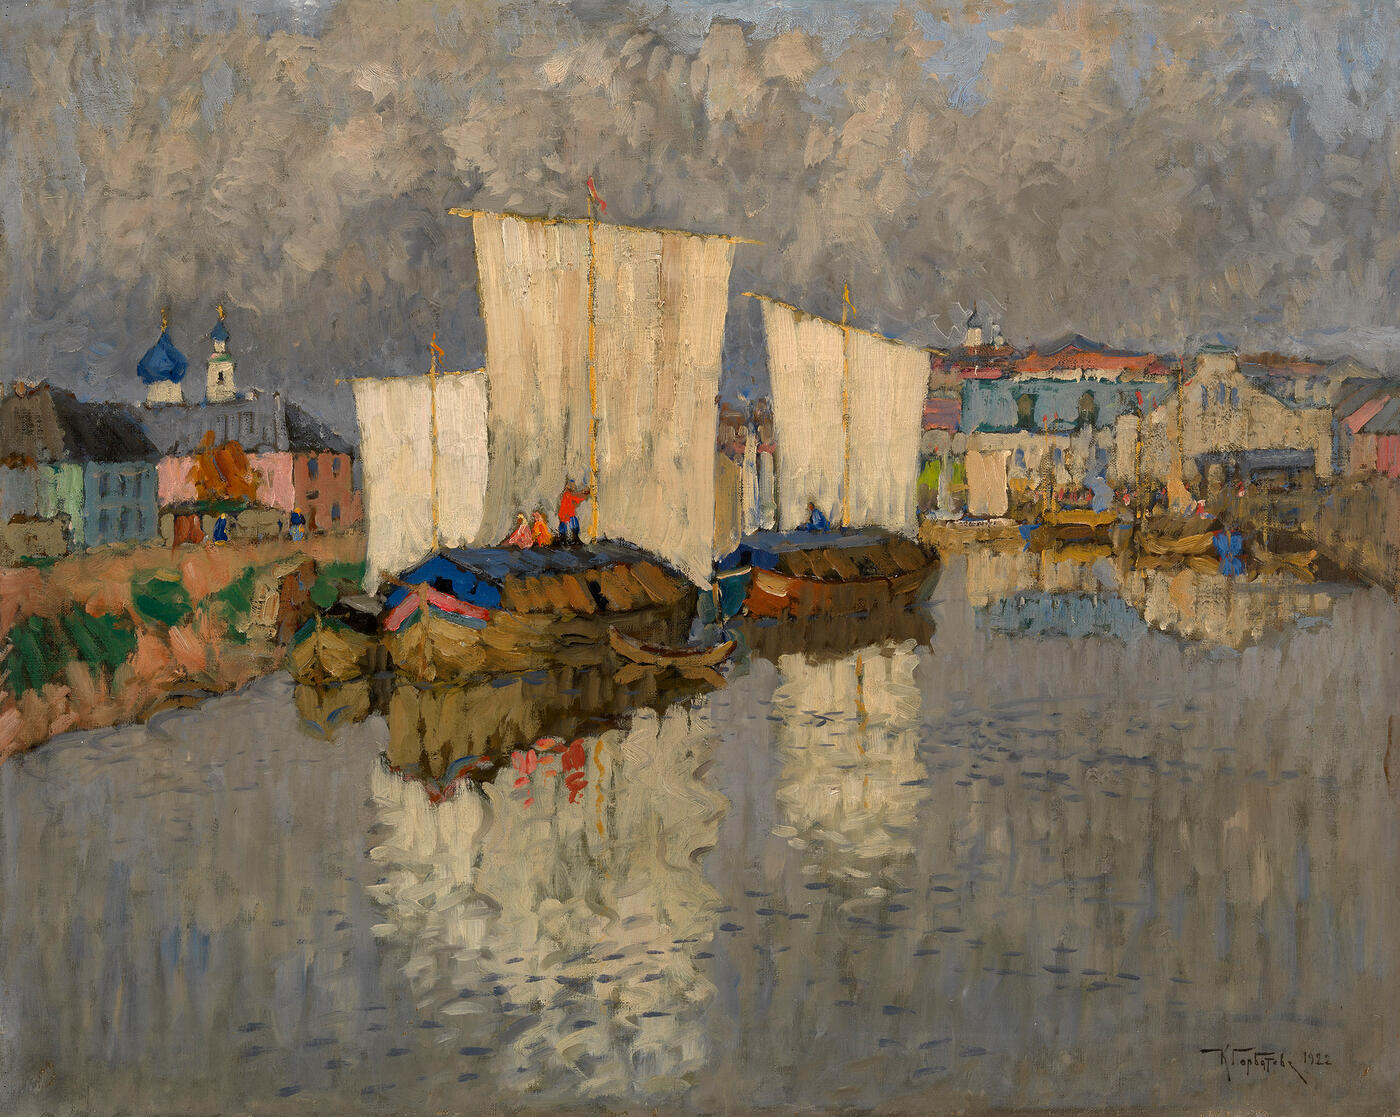 Boats by the River Bank